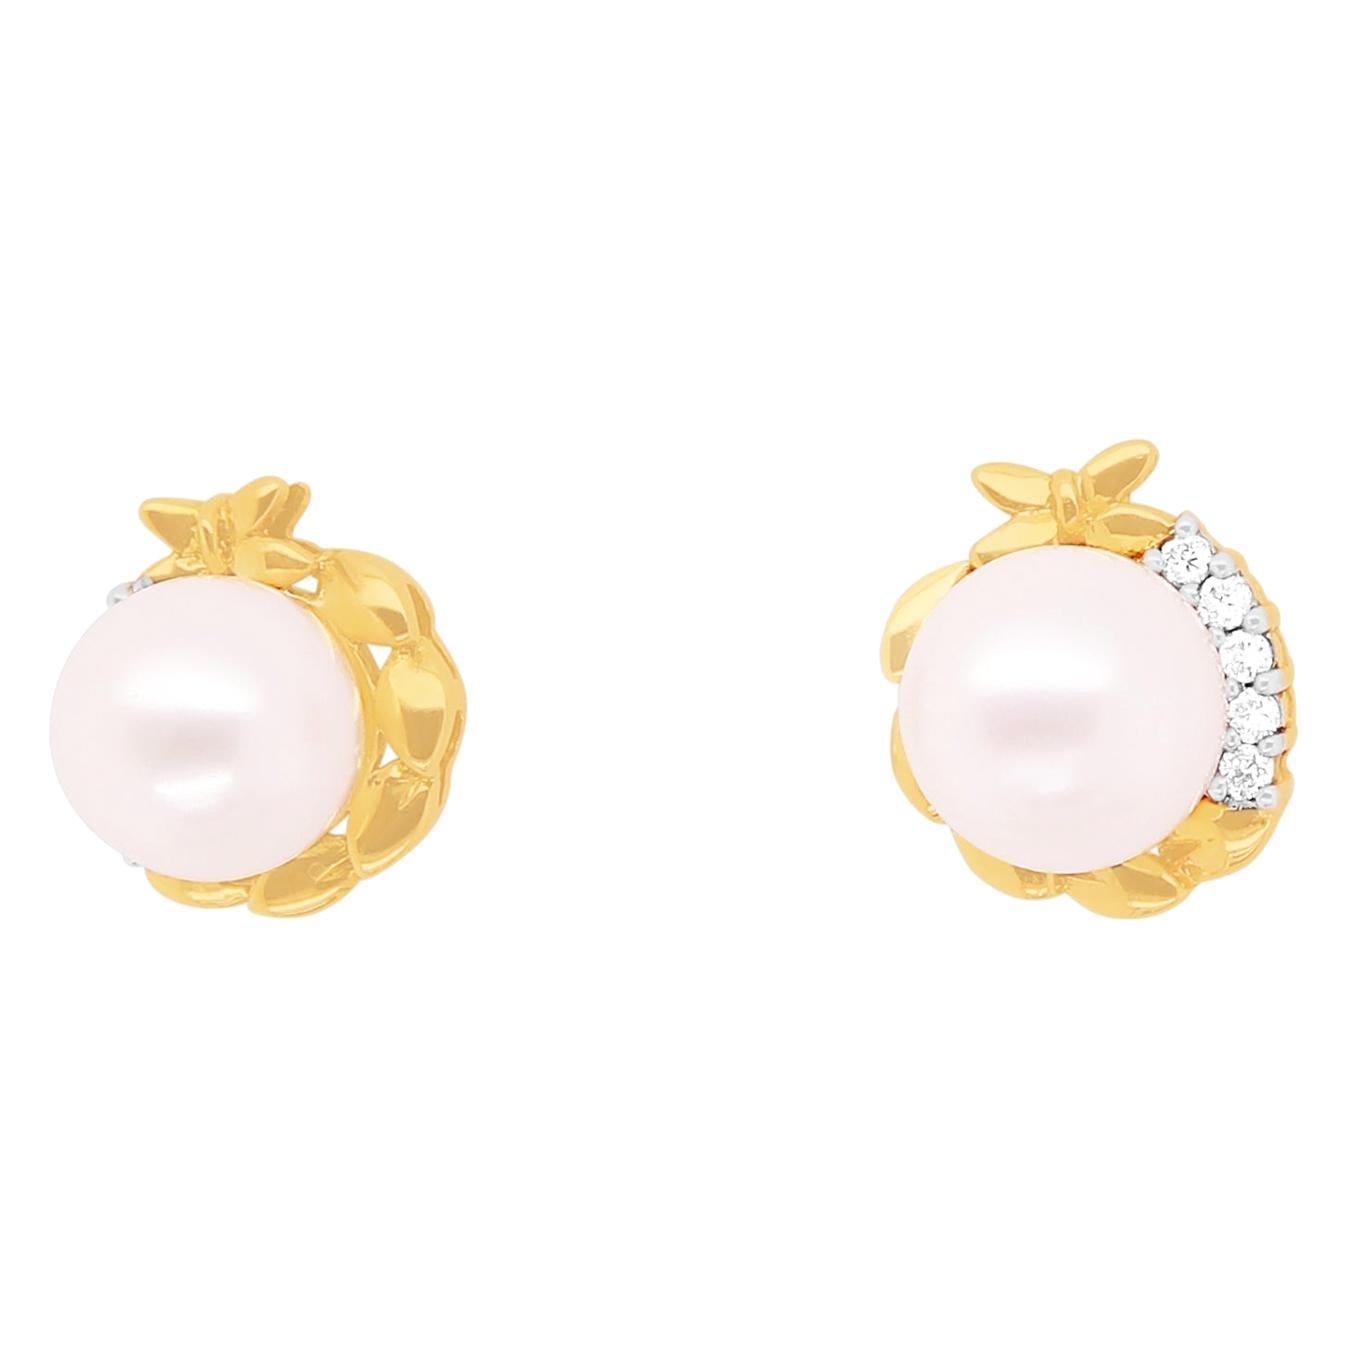 1.87 Carat Round Pearl and White Diamond Wreath Stud Earrings 18K Yellow Gold